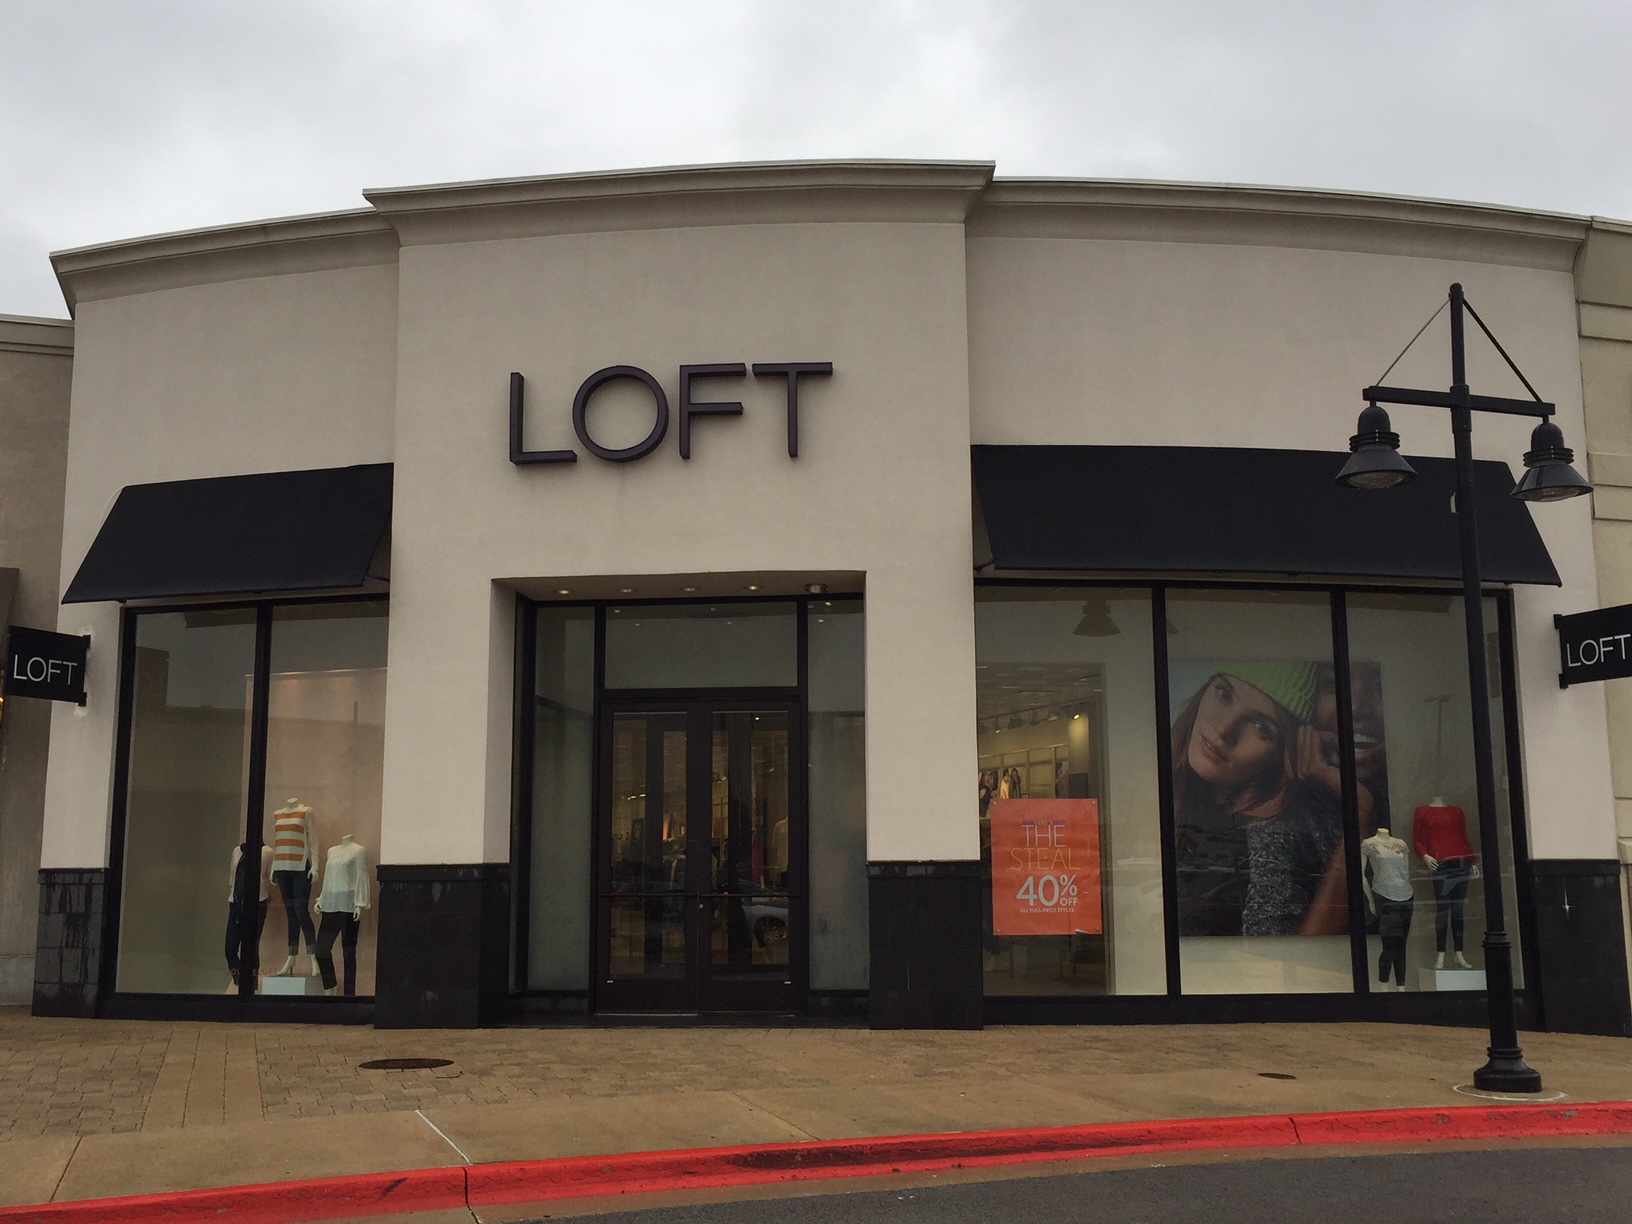 Champaign LOFT Closing at Market Place Shopping Center